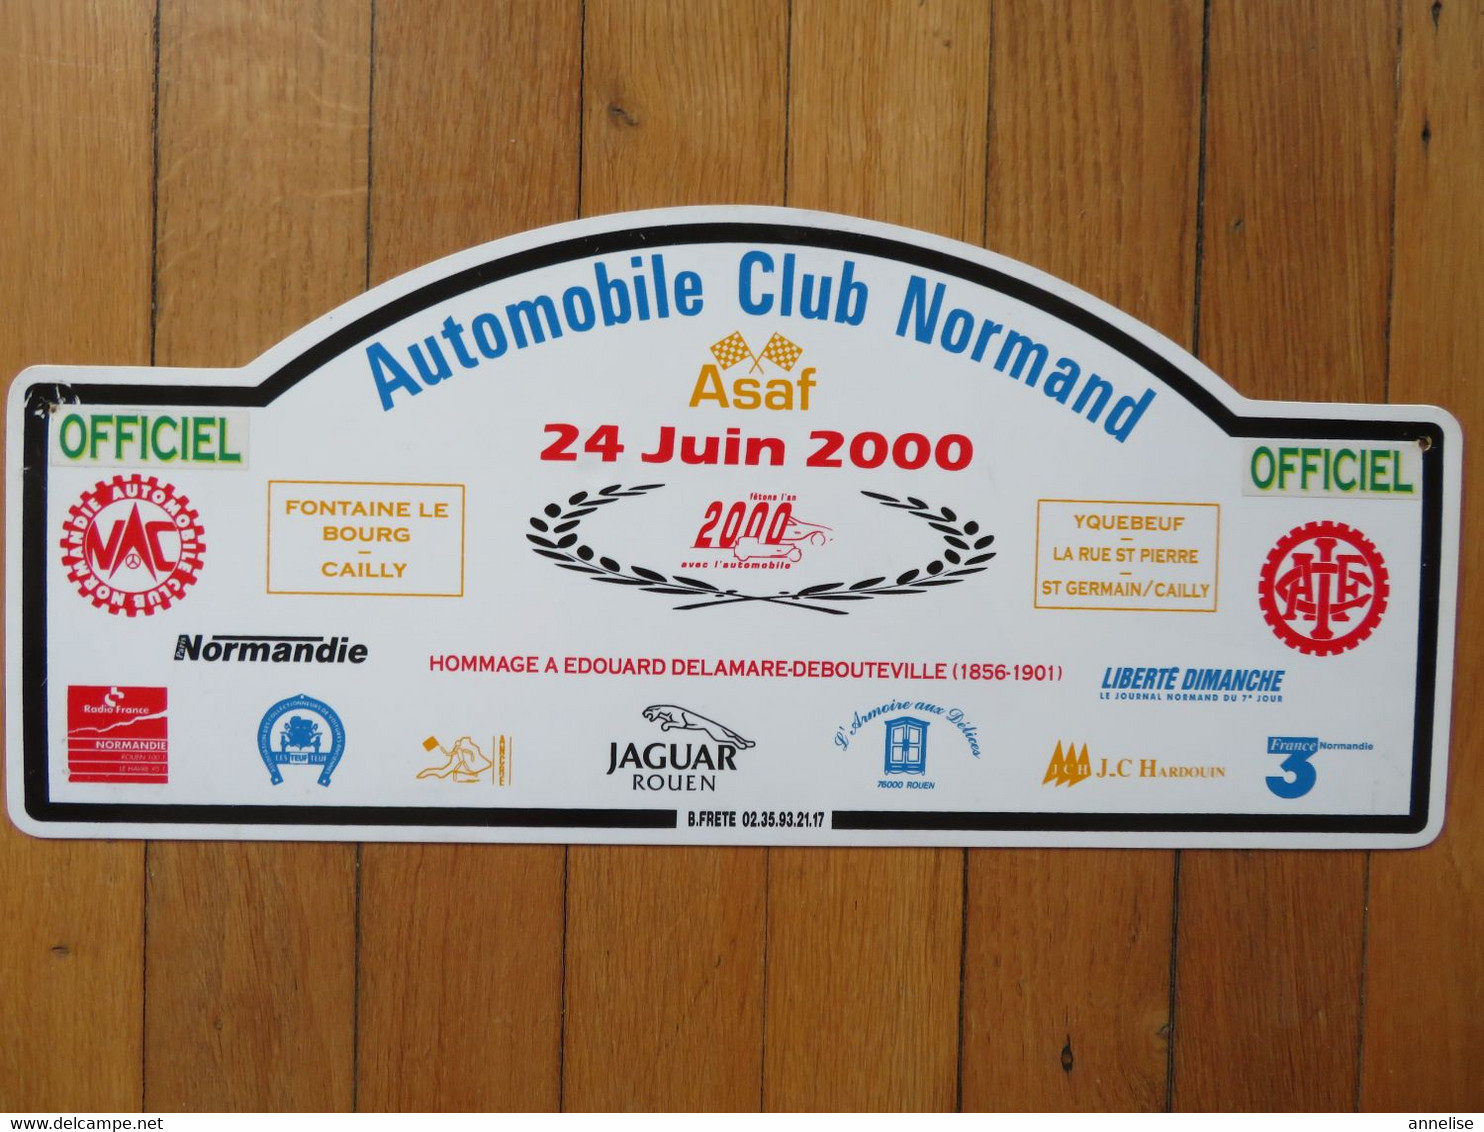 Plaque De Rallye Automobile 24 Juin 2000 "Officiel" Automobile Club Normand 76 Cailly Fontaine Bourg Yquebeuf St Germain - Targhe Rallye